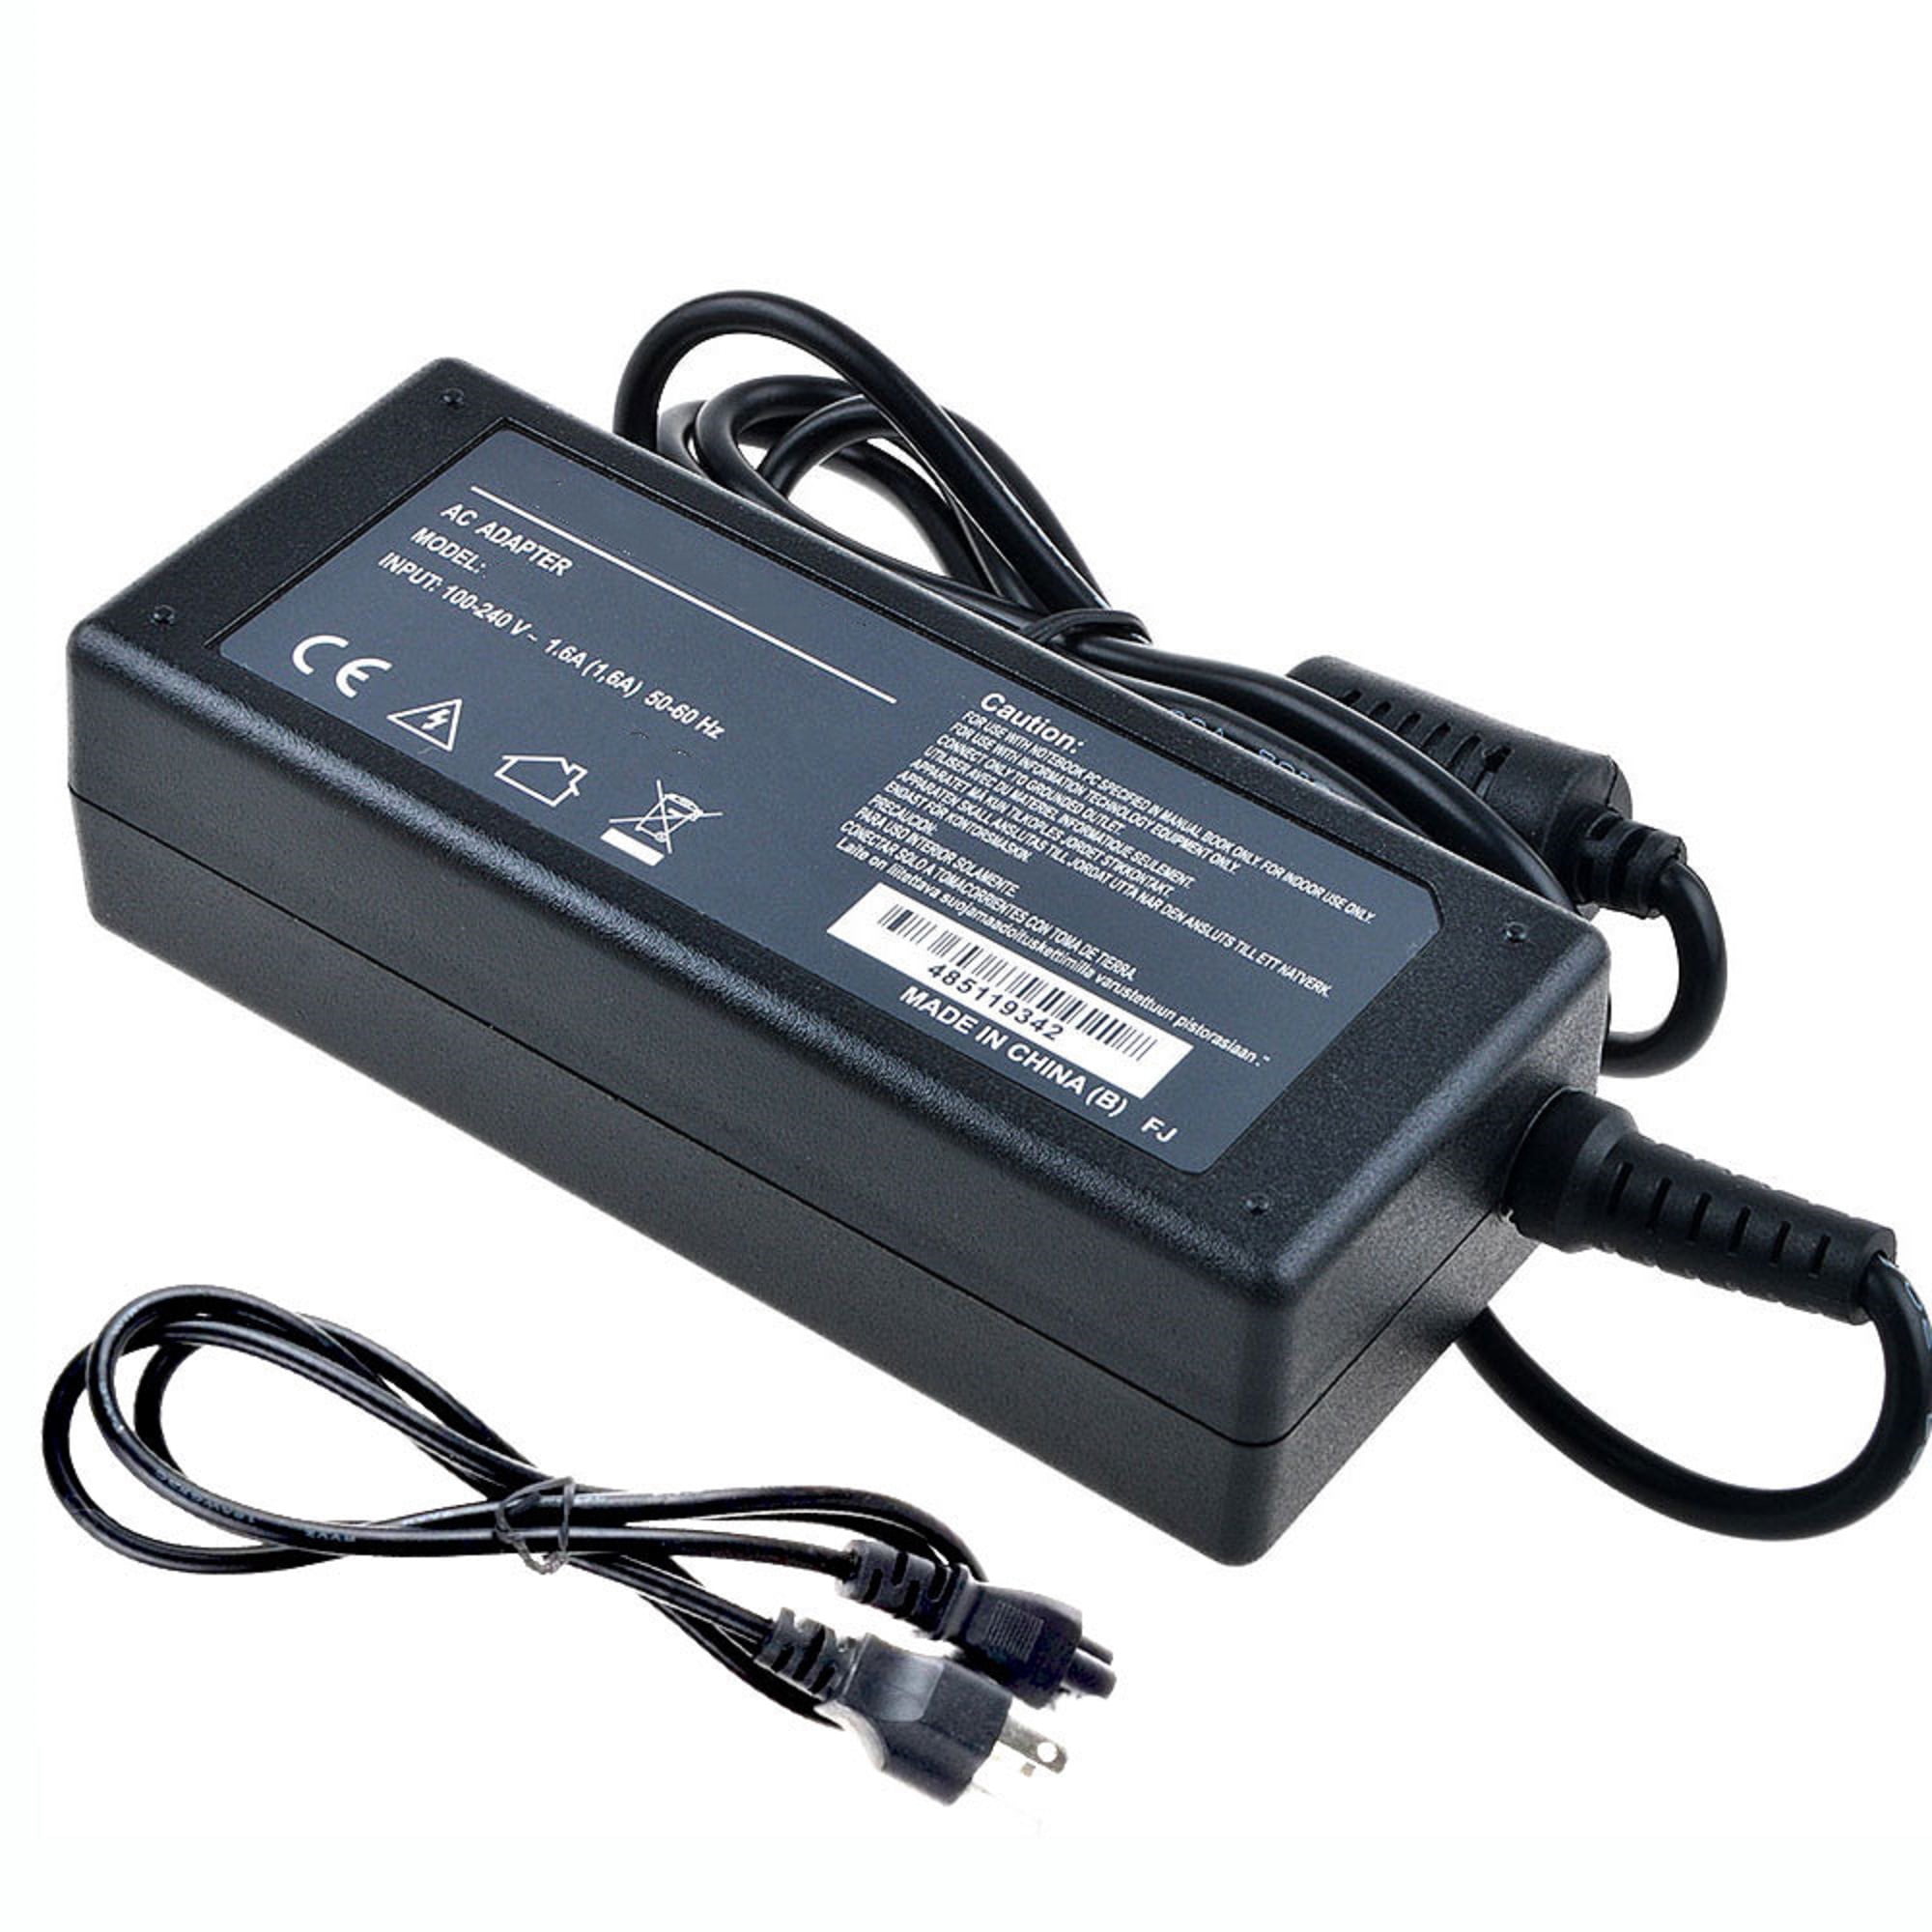 battery charger AC Adapter For Epson Mobilink TM-P60 wireless mobile printer 